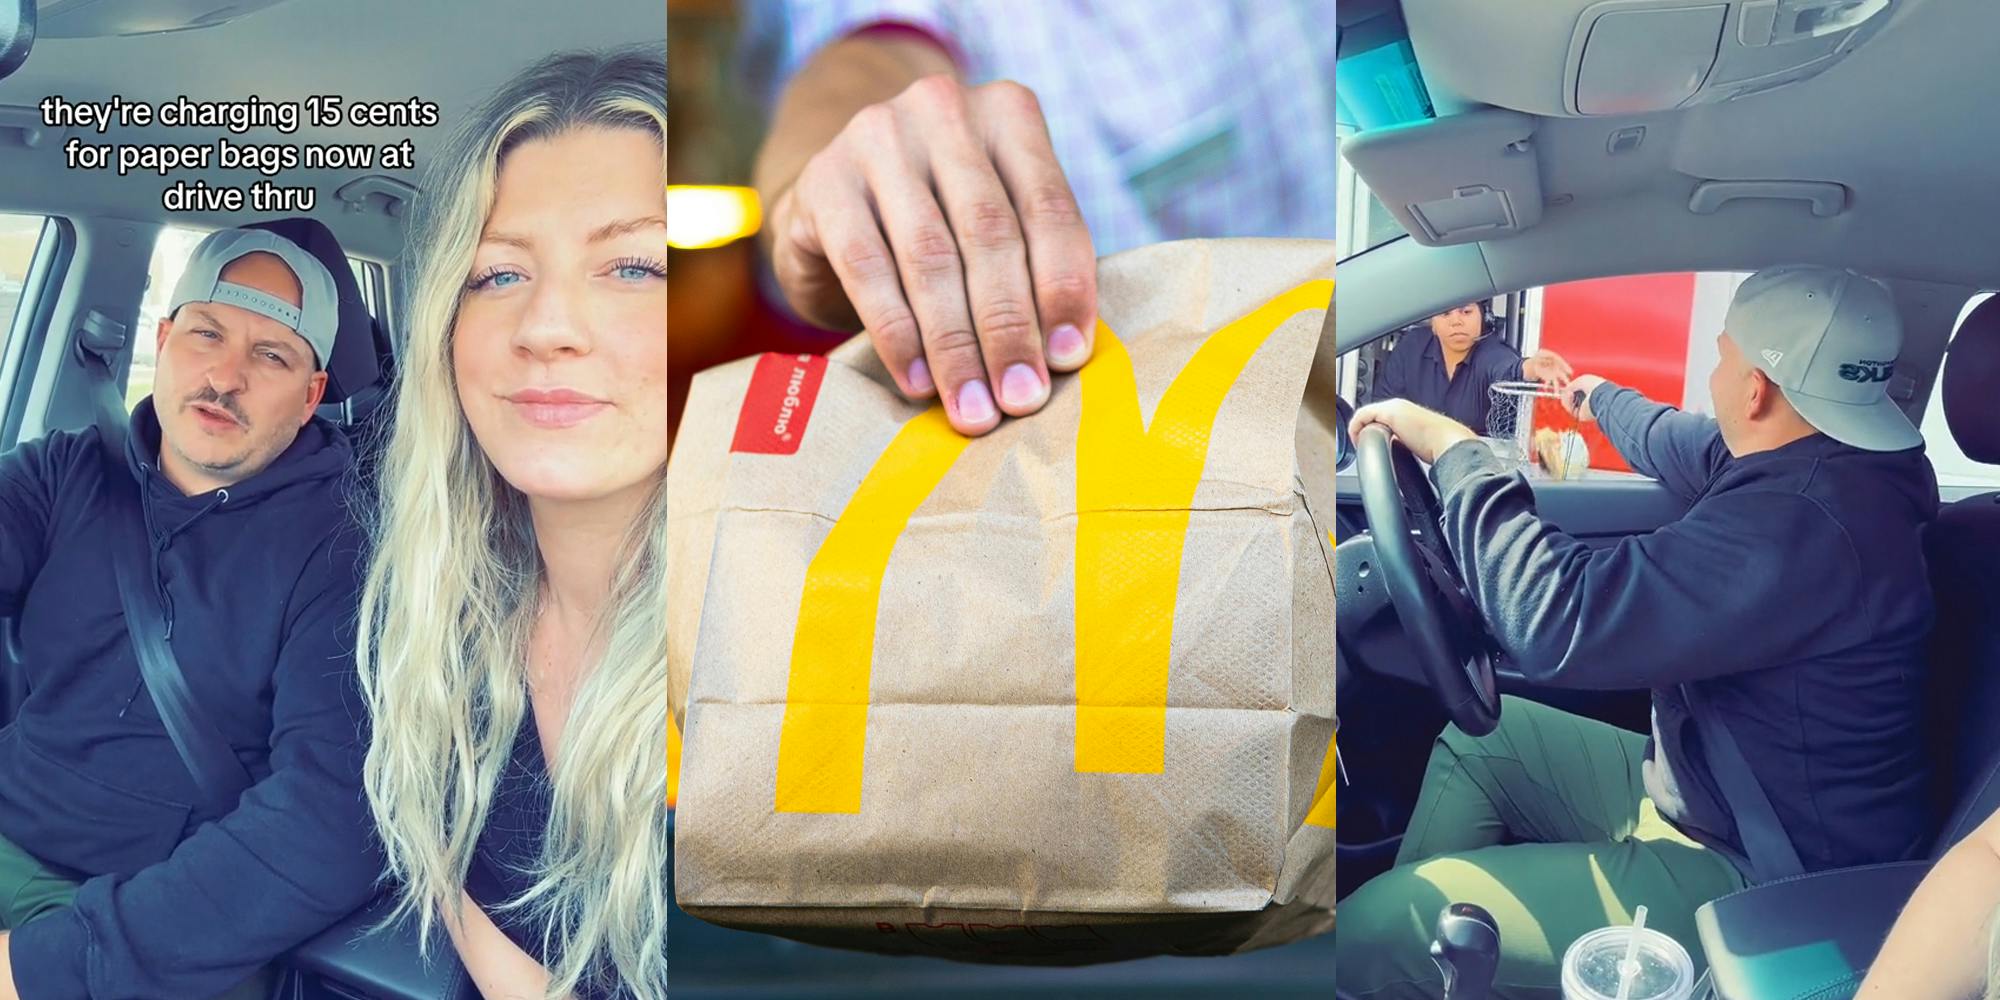 McDonald's customers in car with caption "they're charging 15 cents for paper bags now at drive thru" (l) McDonald's worker holding branded paper bag (c) McDonald's customer receiving fillet-o-fish in fishing net at drive thru (r)